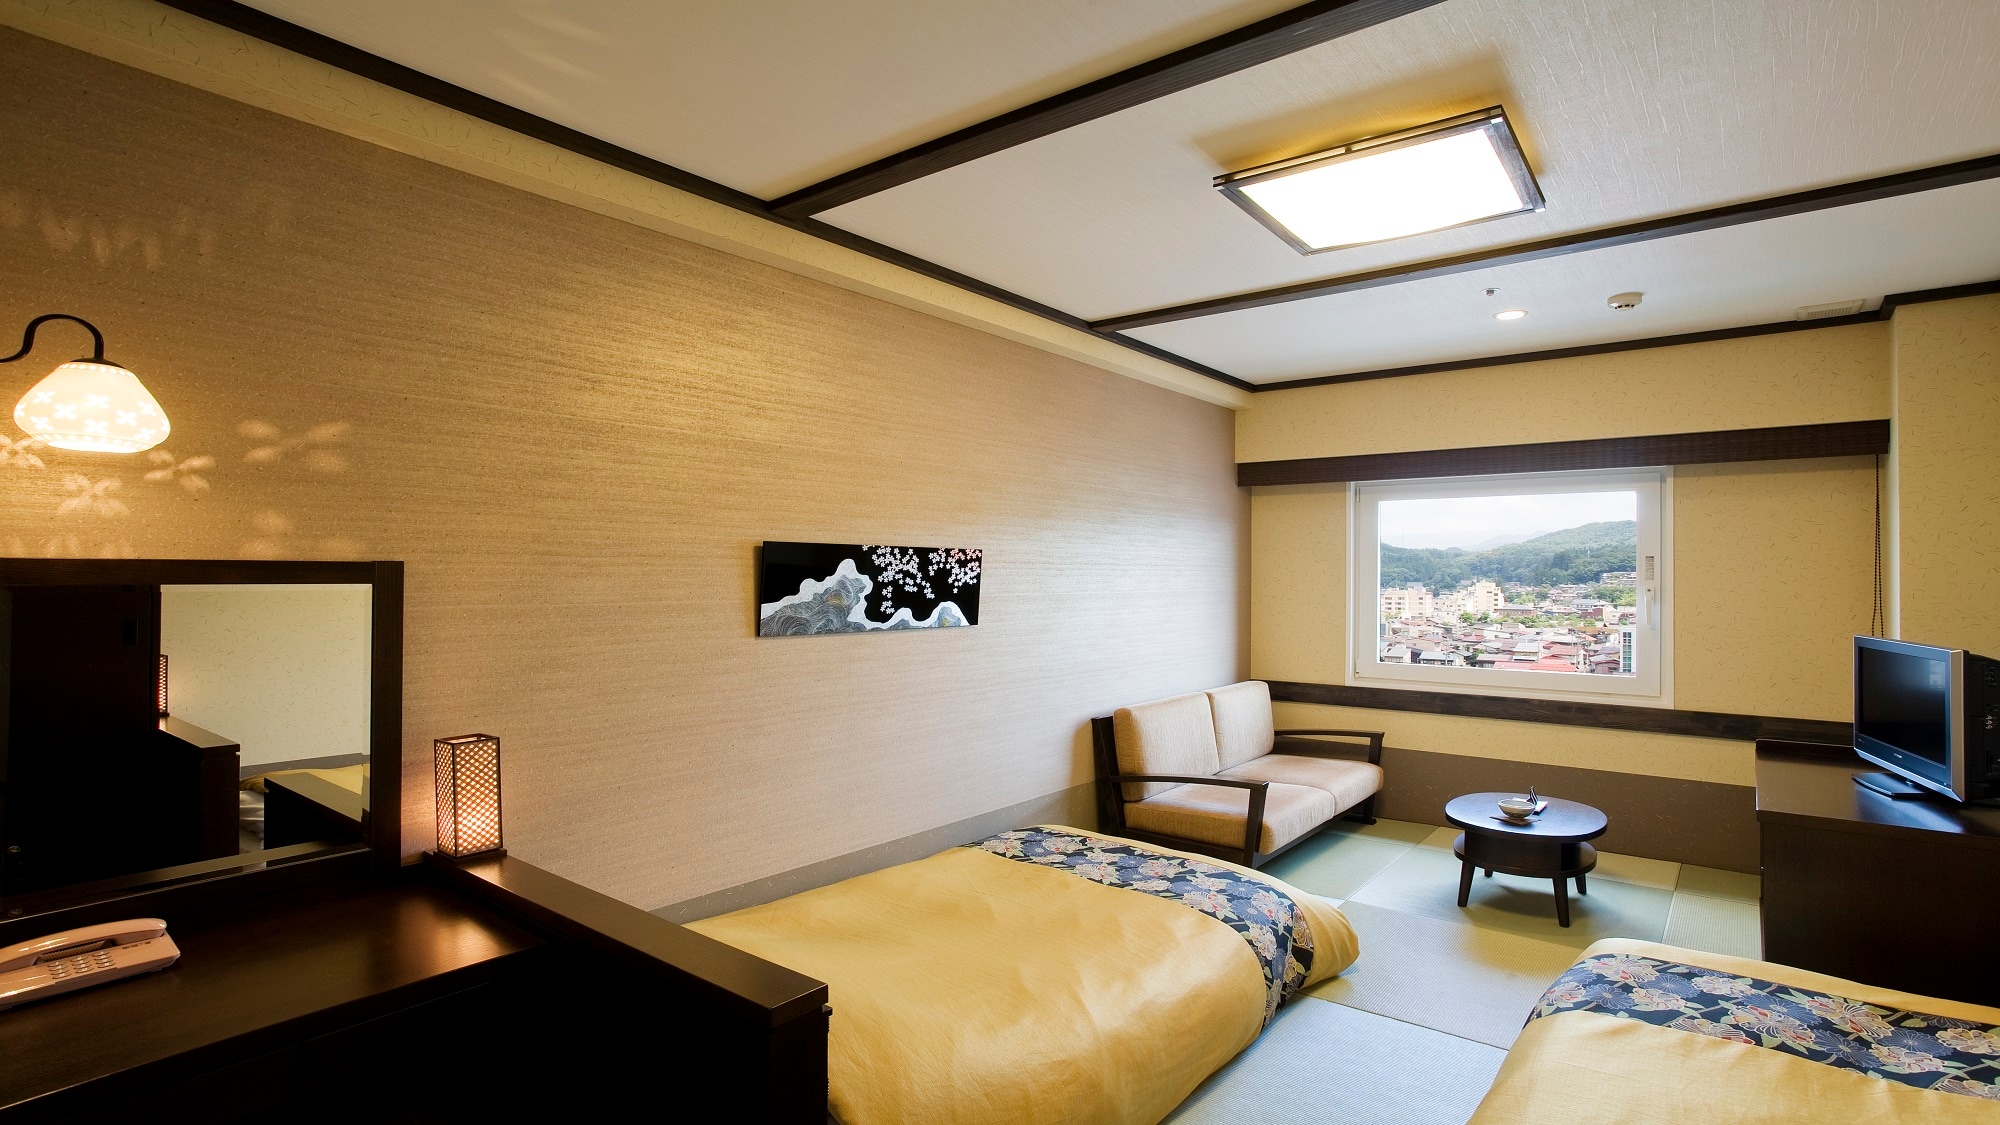 [Example of guest room] "Japanese" twin